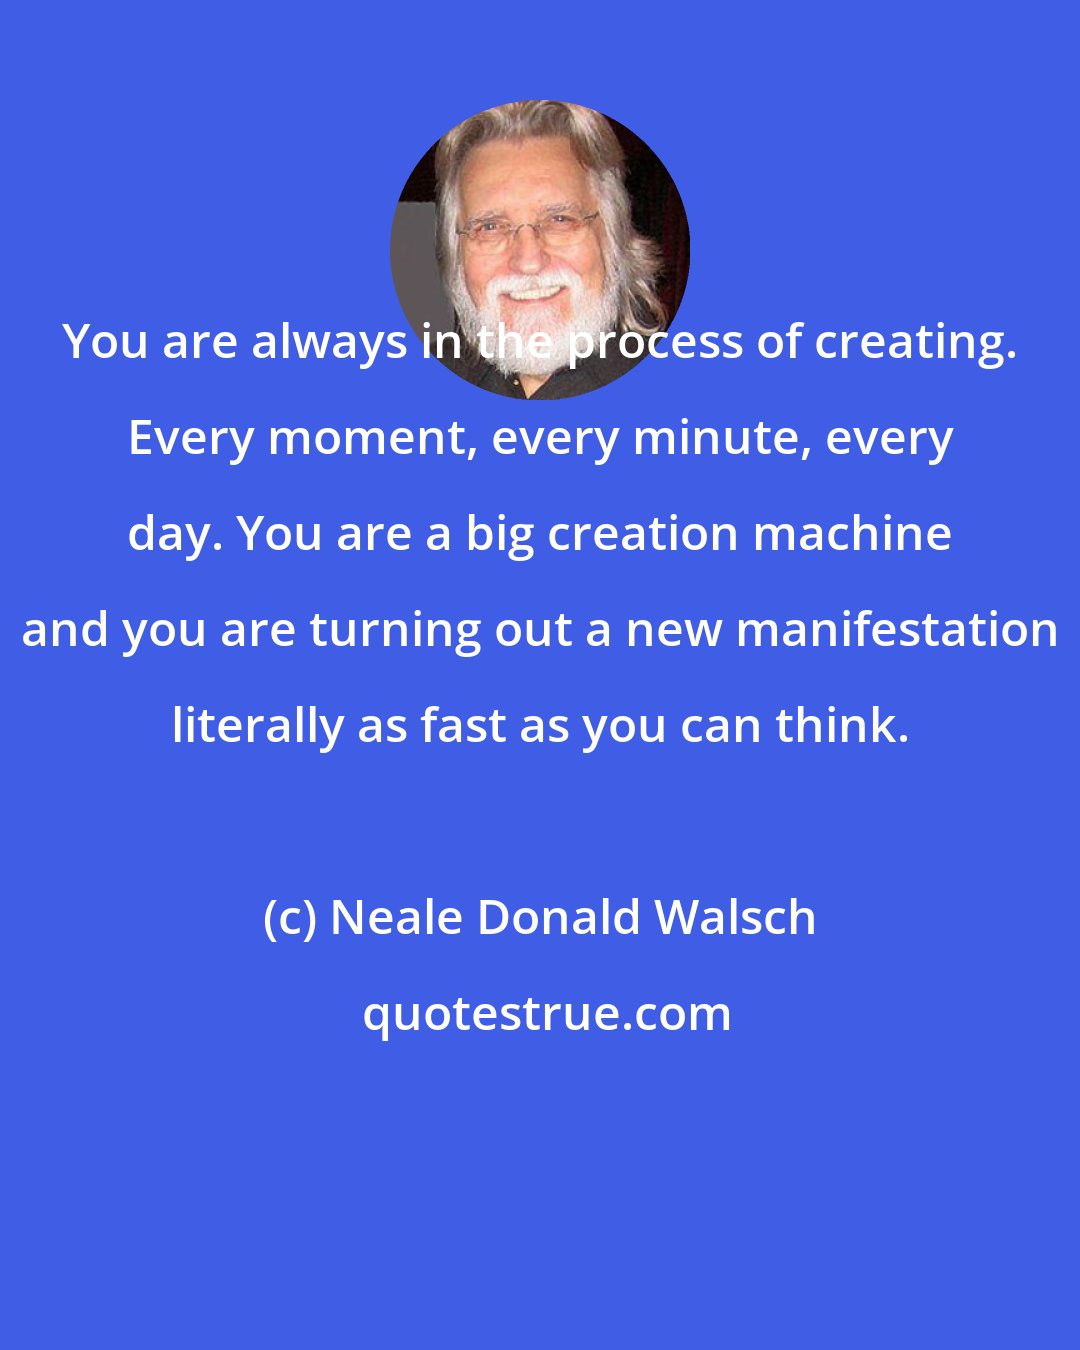 Neale Donald Walsch: You are always in the process of creating. Every moment, every minute, every day. You are a big creation machine and you are turning out a new manifestation literally as fast as you can think.